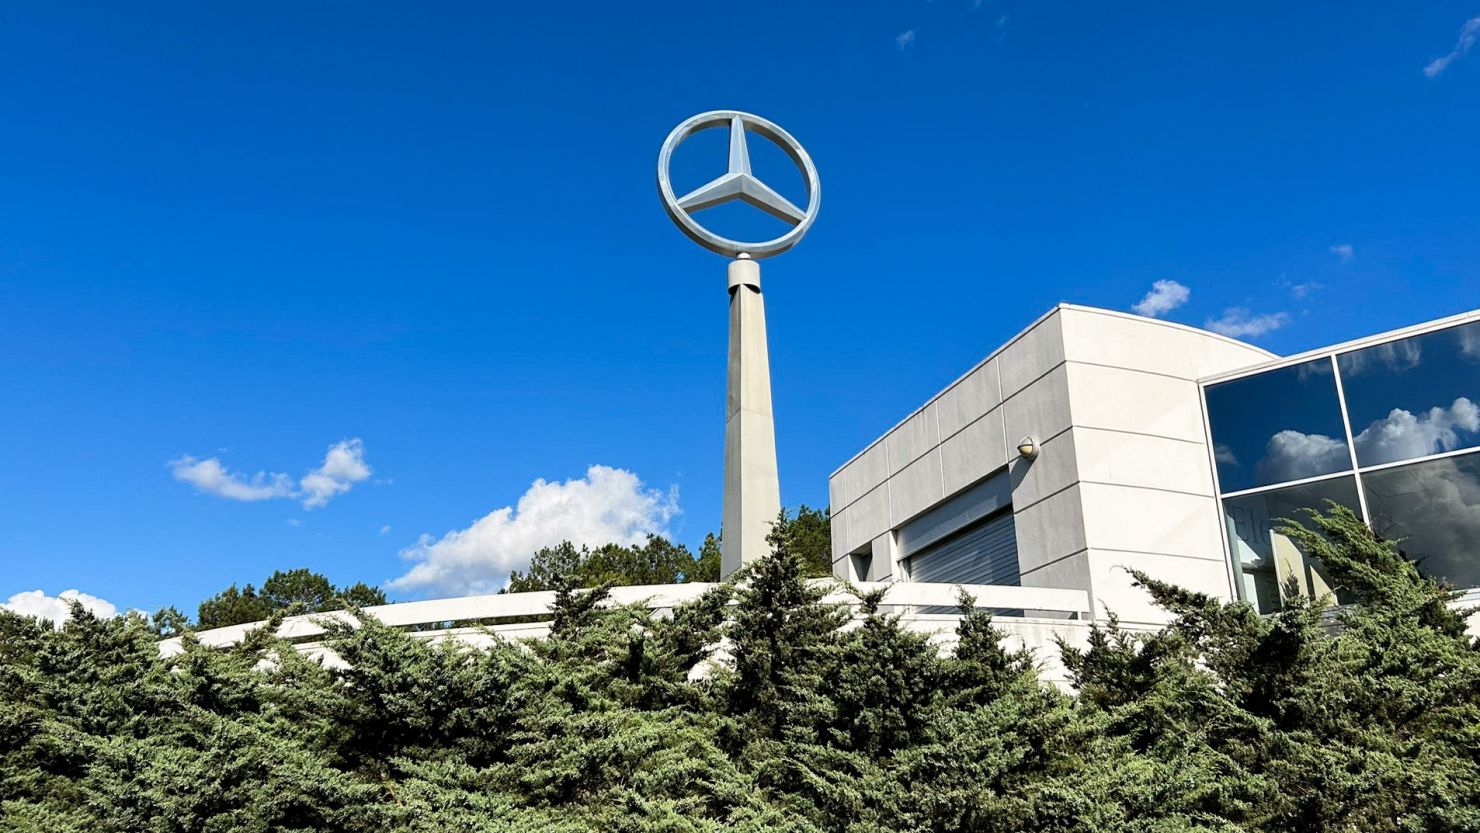 Alabama's Mercedes Workers Vote No to Union: A Major Decision Amid Auto Industry Shifts